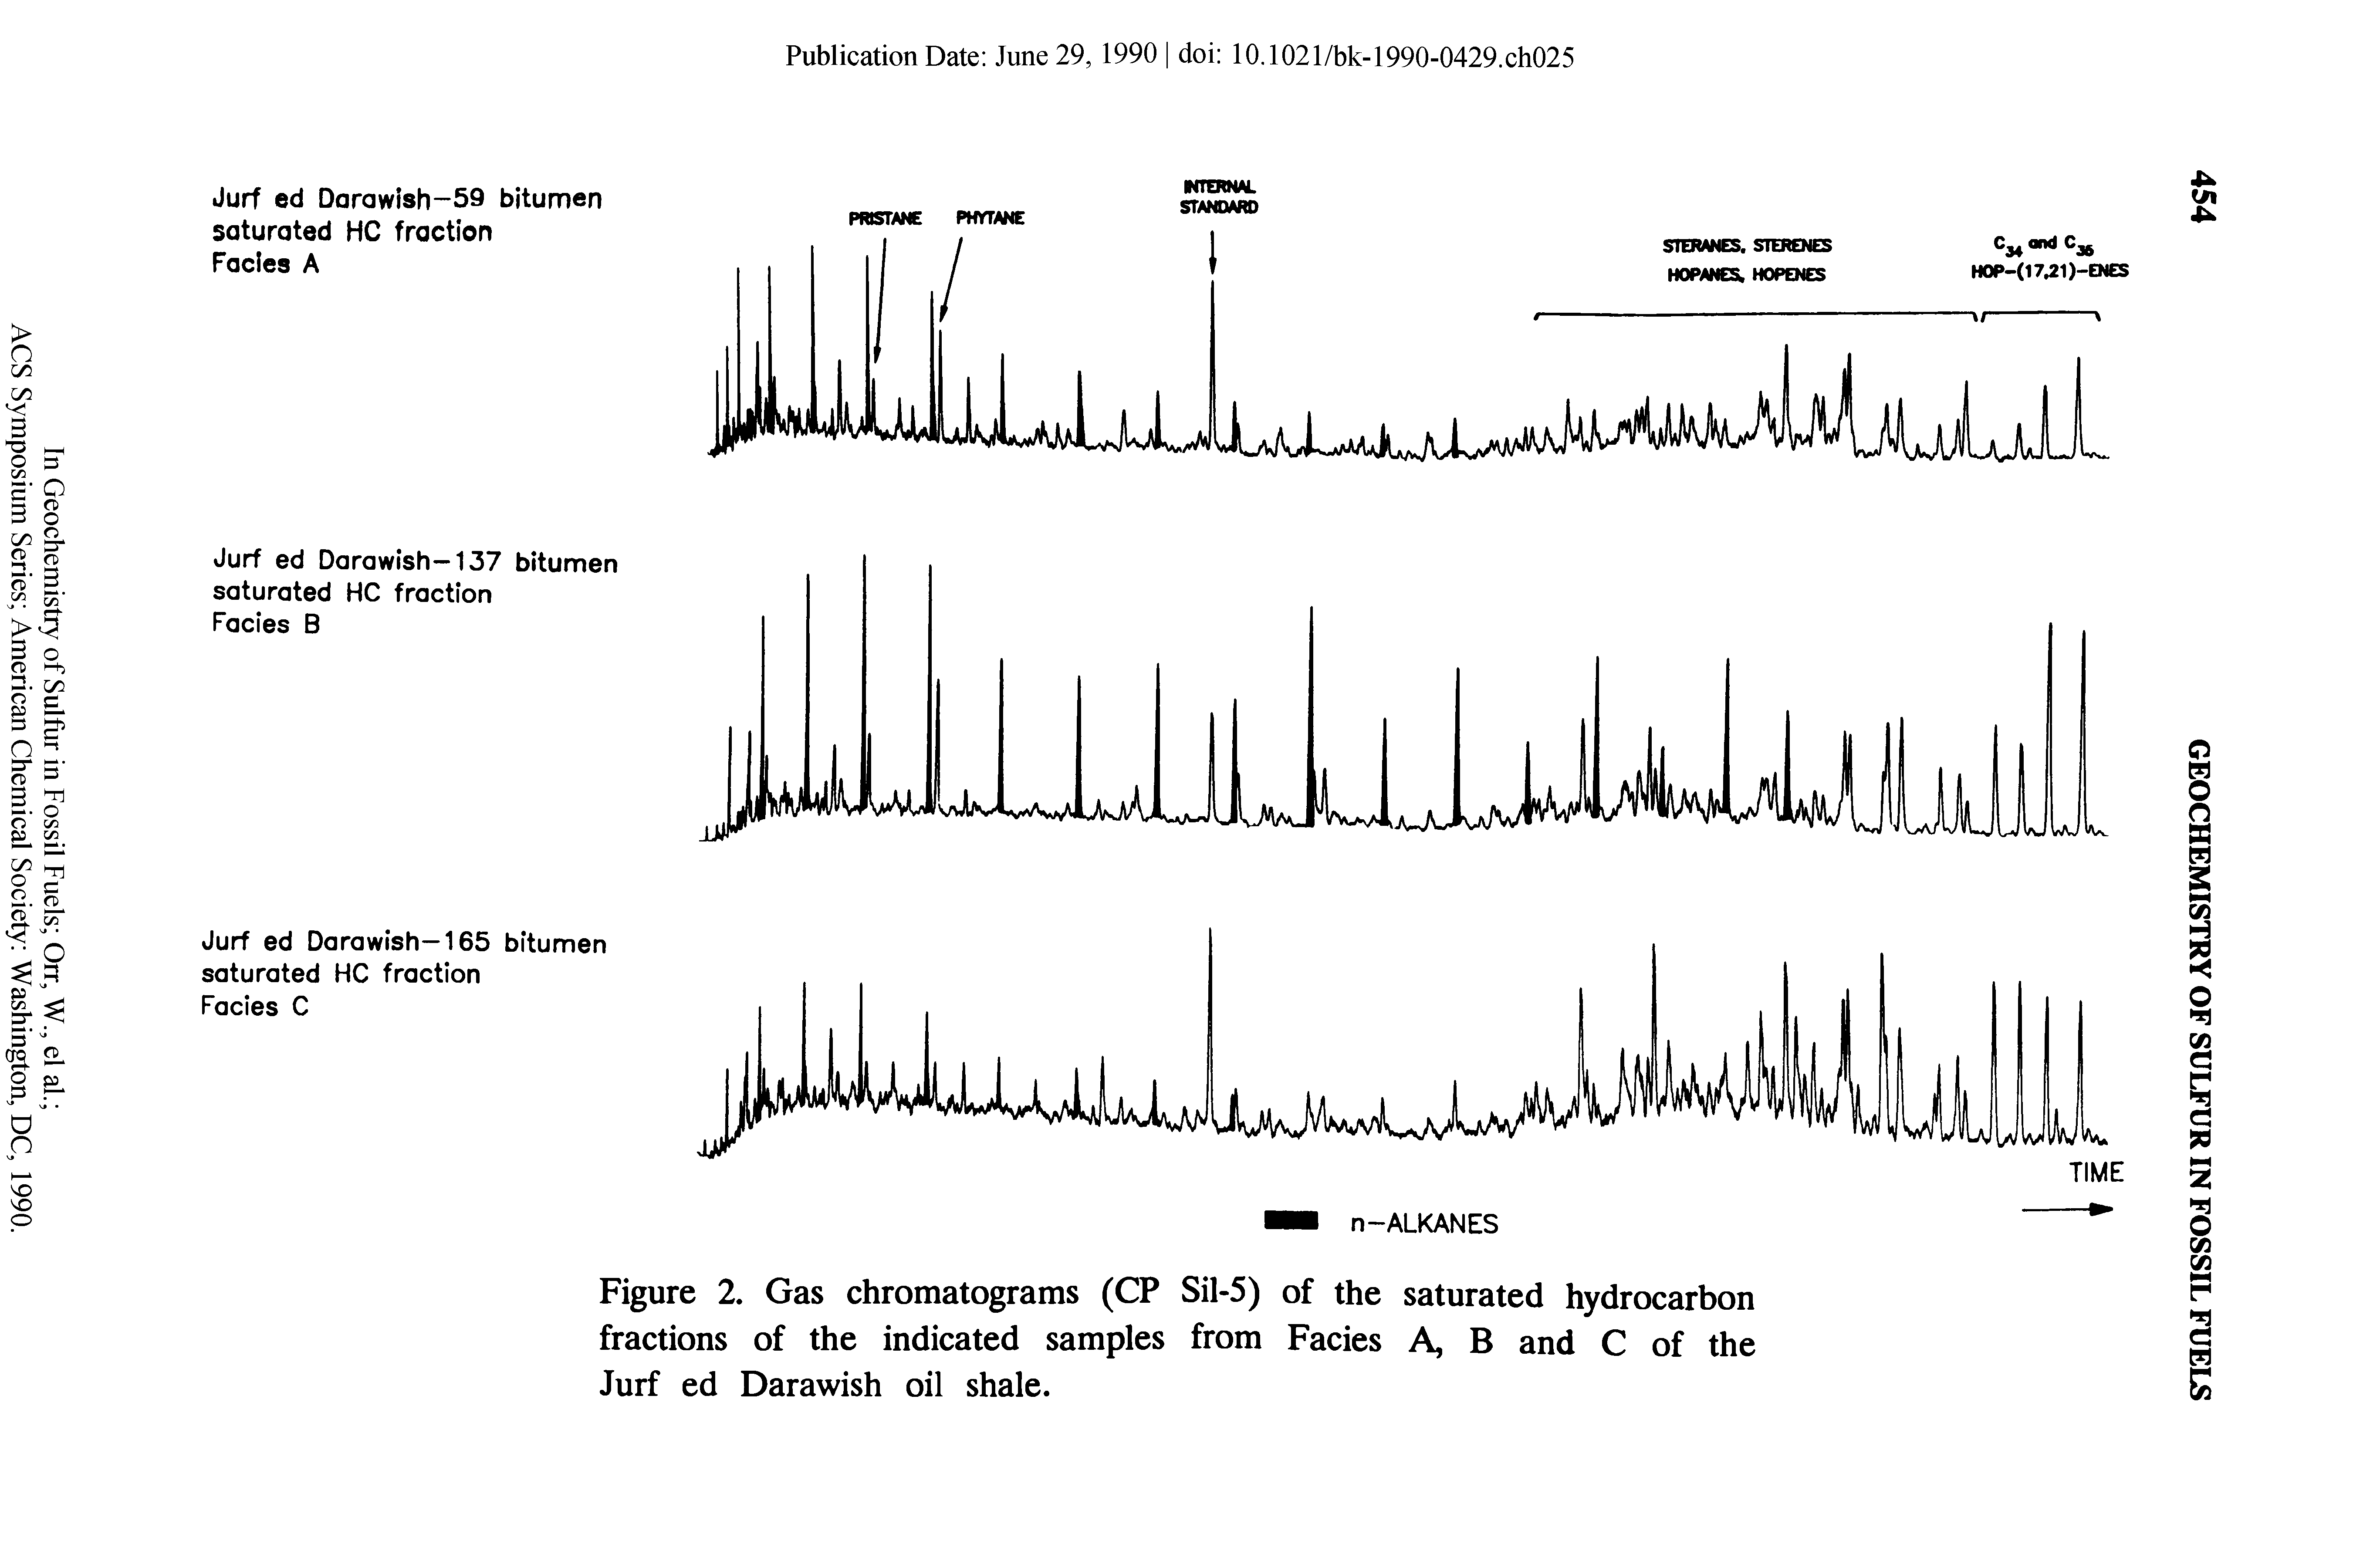 Figure 2. Gas chromatograms (CP Sil-5) of the saturated hydrocarbon fractions of the indicated samples from Facies A, B and C of the Jurf ed Darawish oil shale.